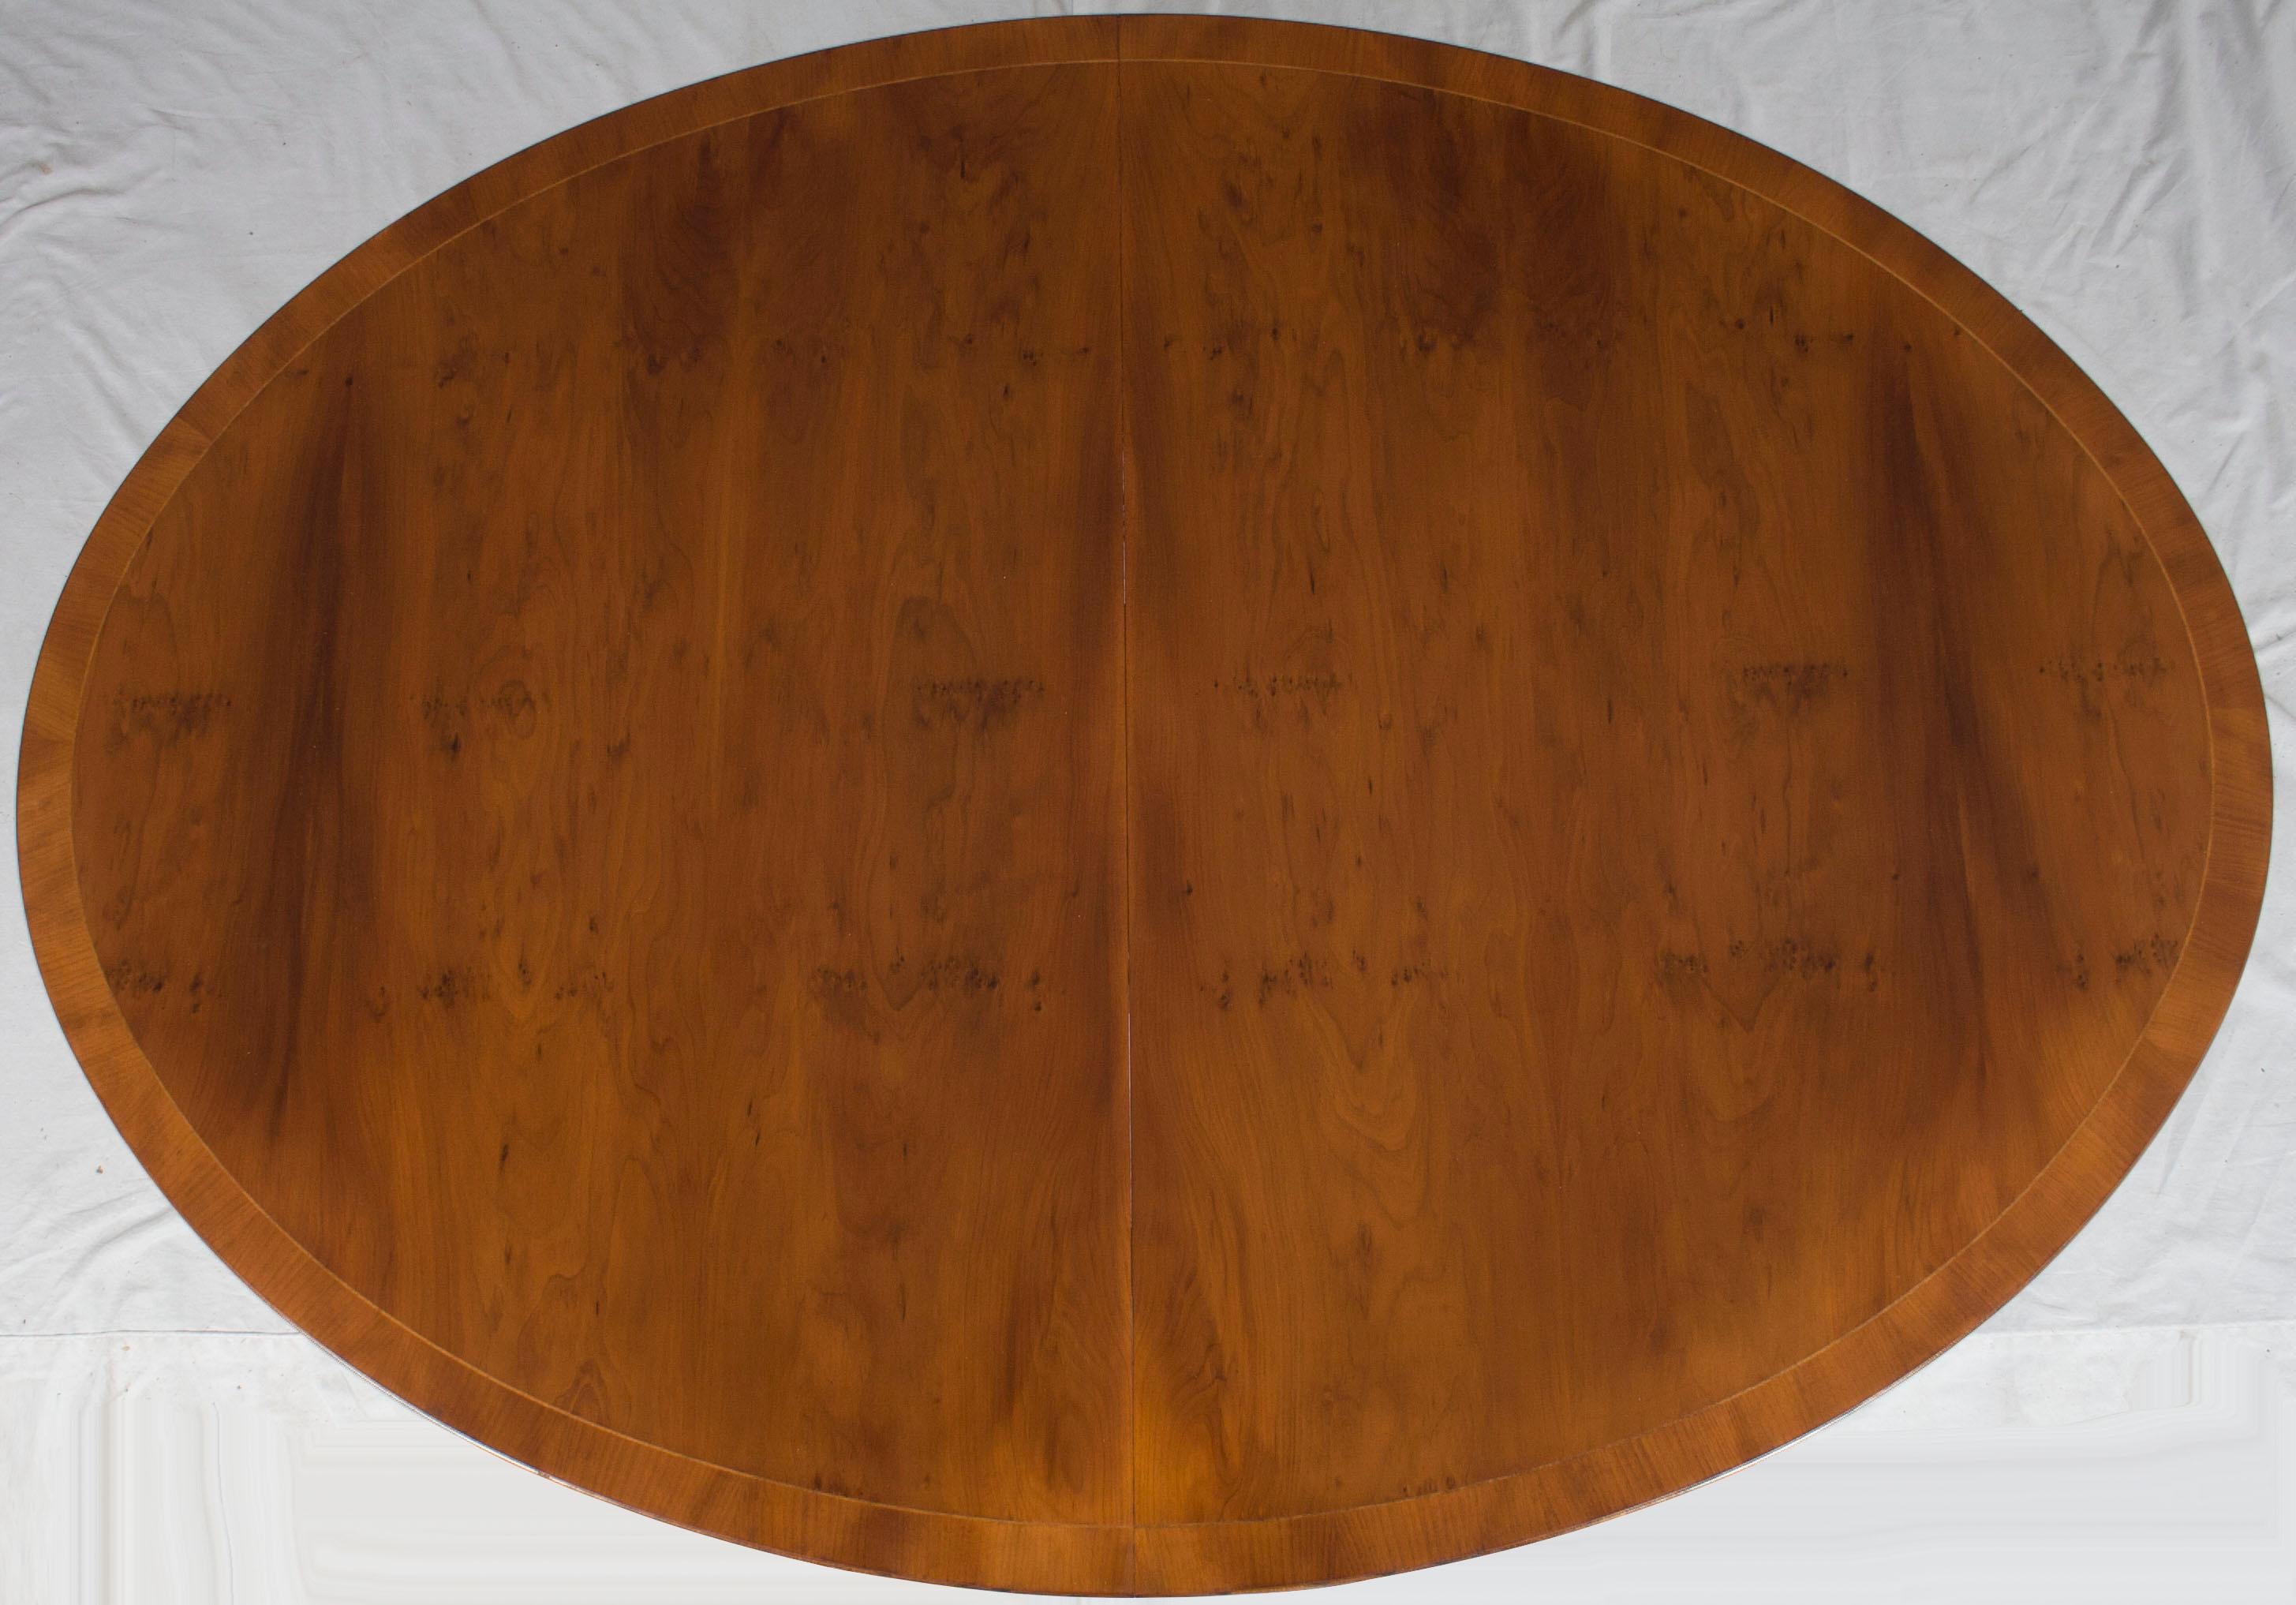 Oval Yew Wood Pedestal Dining Room Table with Leaf 4